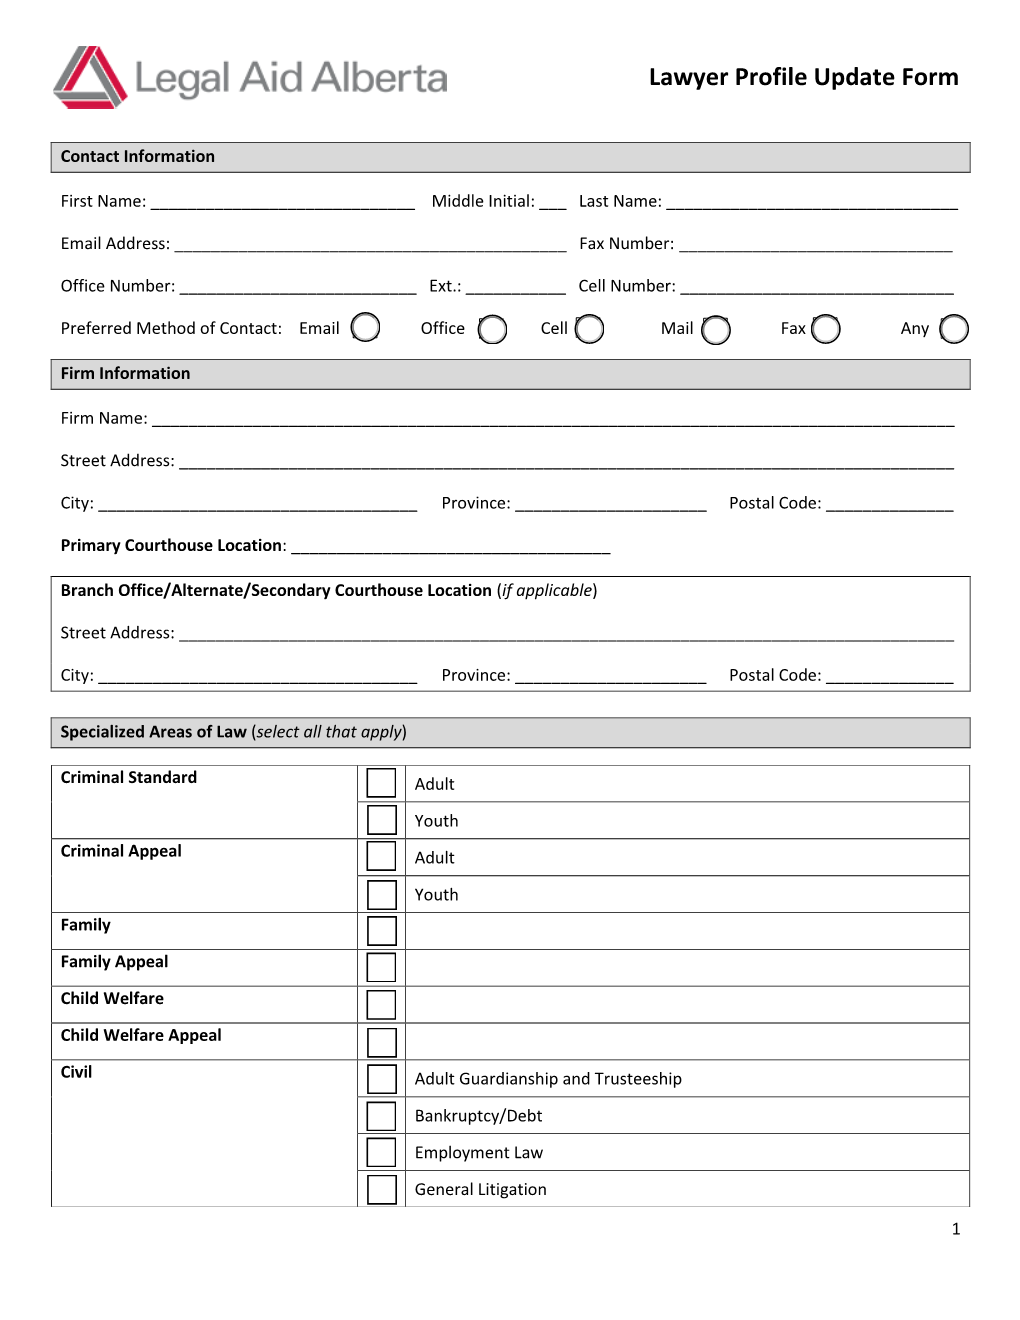 Lawyer Profile Update Form